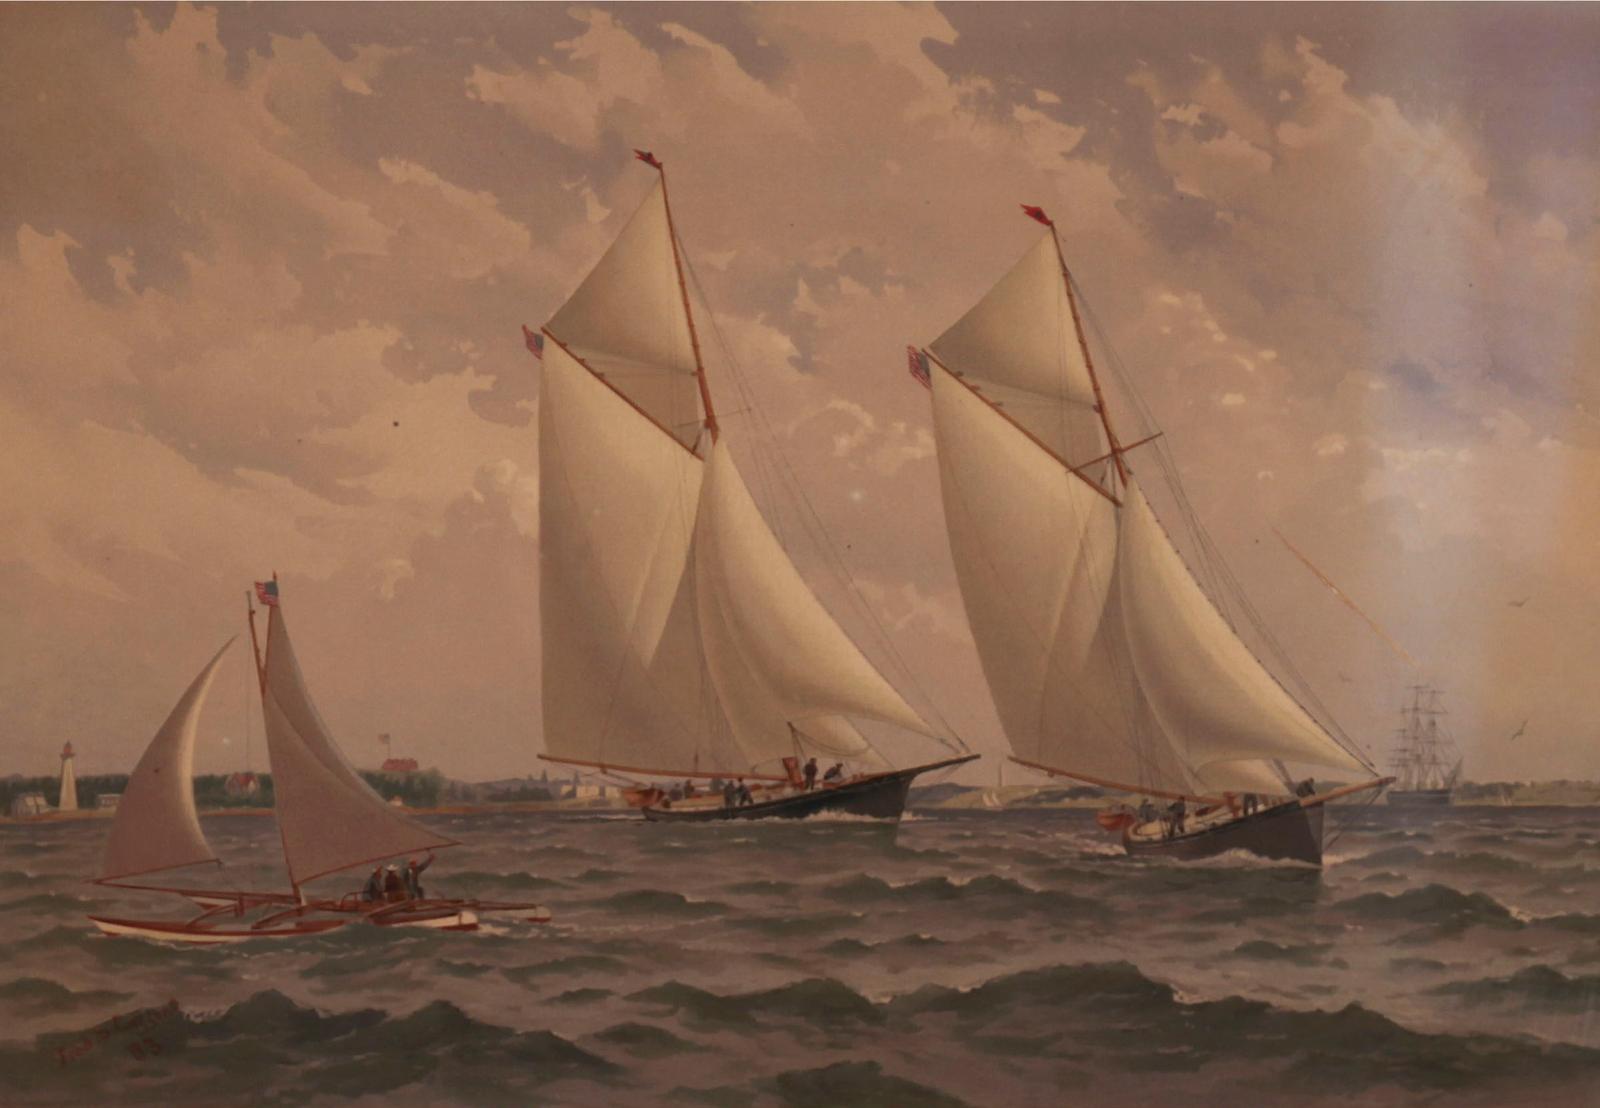 Frederic Schiller Cozzens (1846-1928) - Plate From American Yachts, 1883